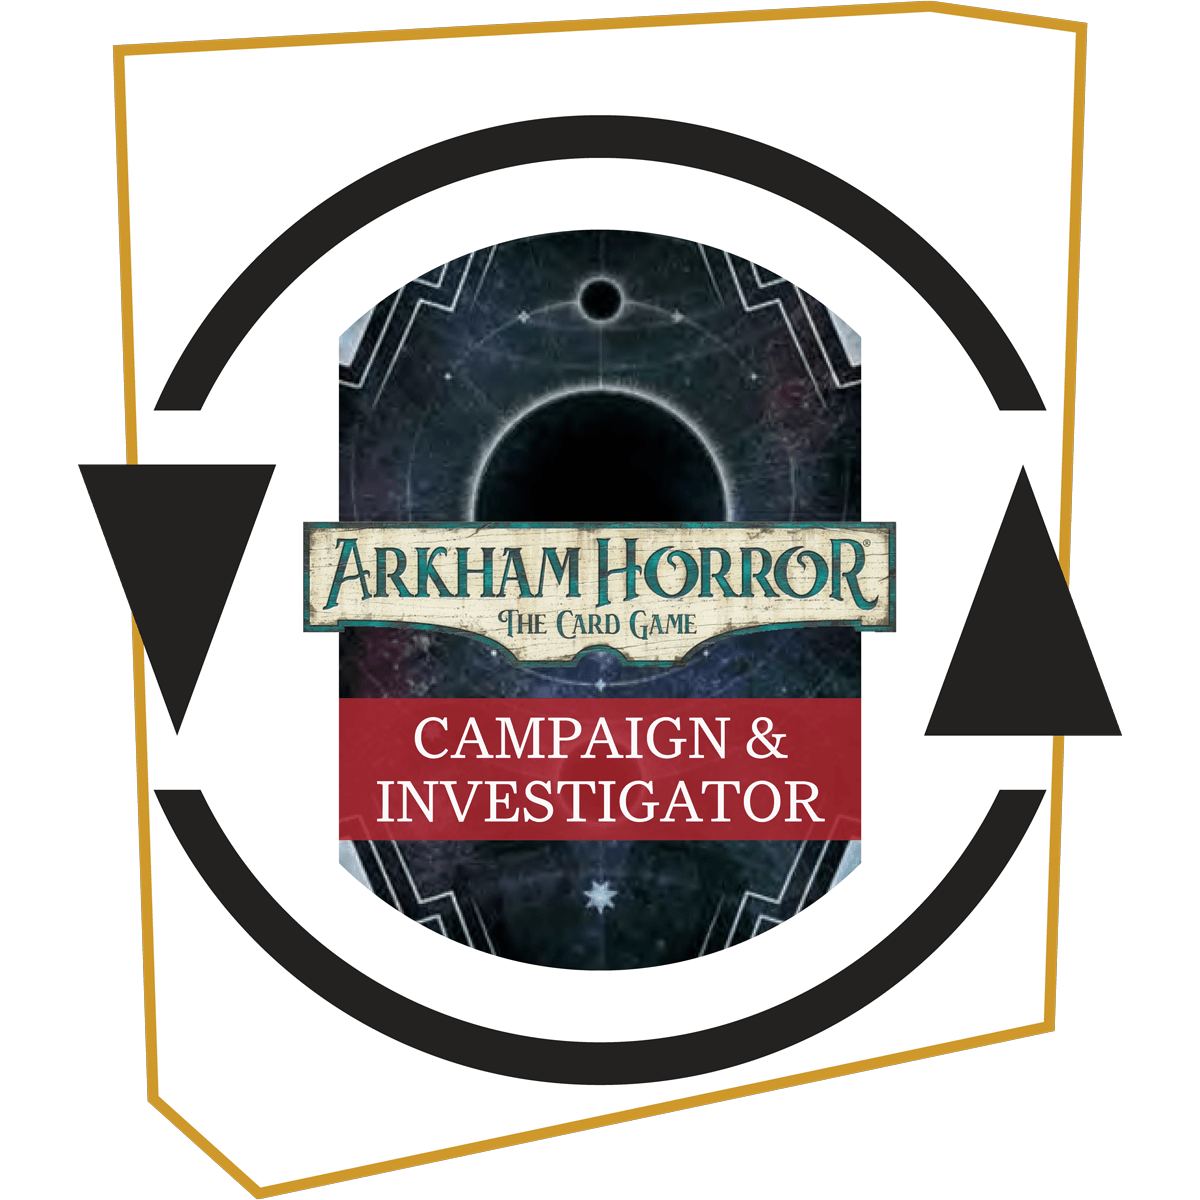 Arkham Horror: The Card Game Expansion Subscription